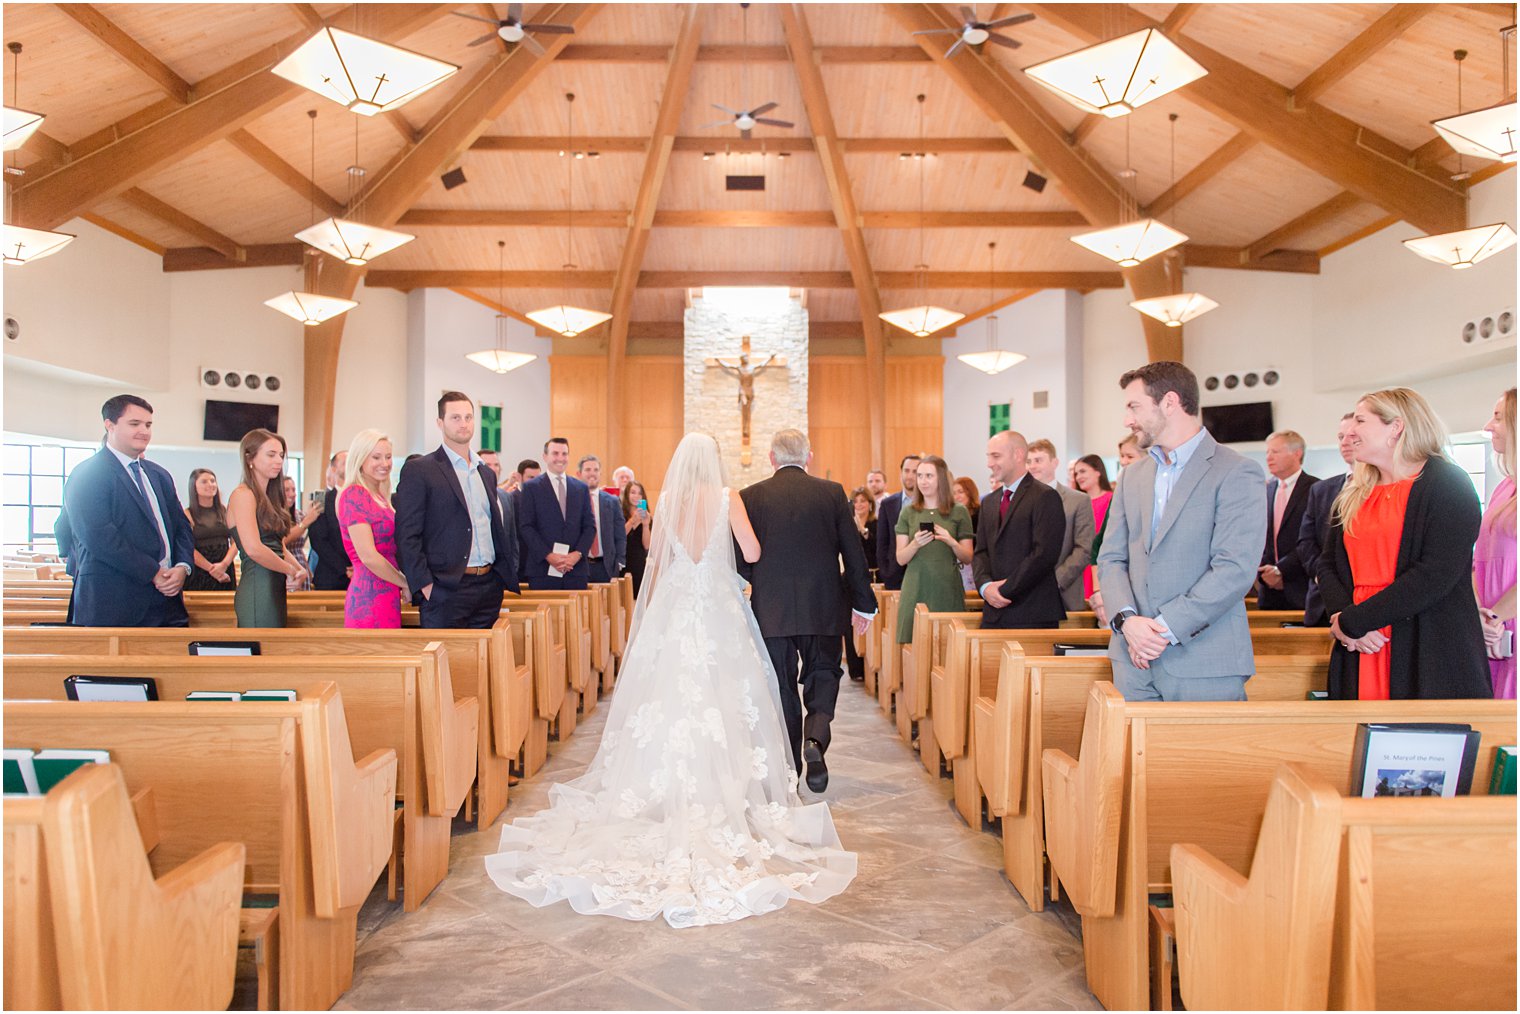 bride walks down aisle with dad for traditional church wedding in New Jersey